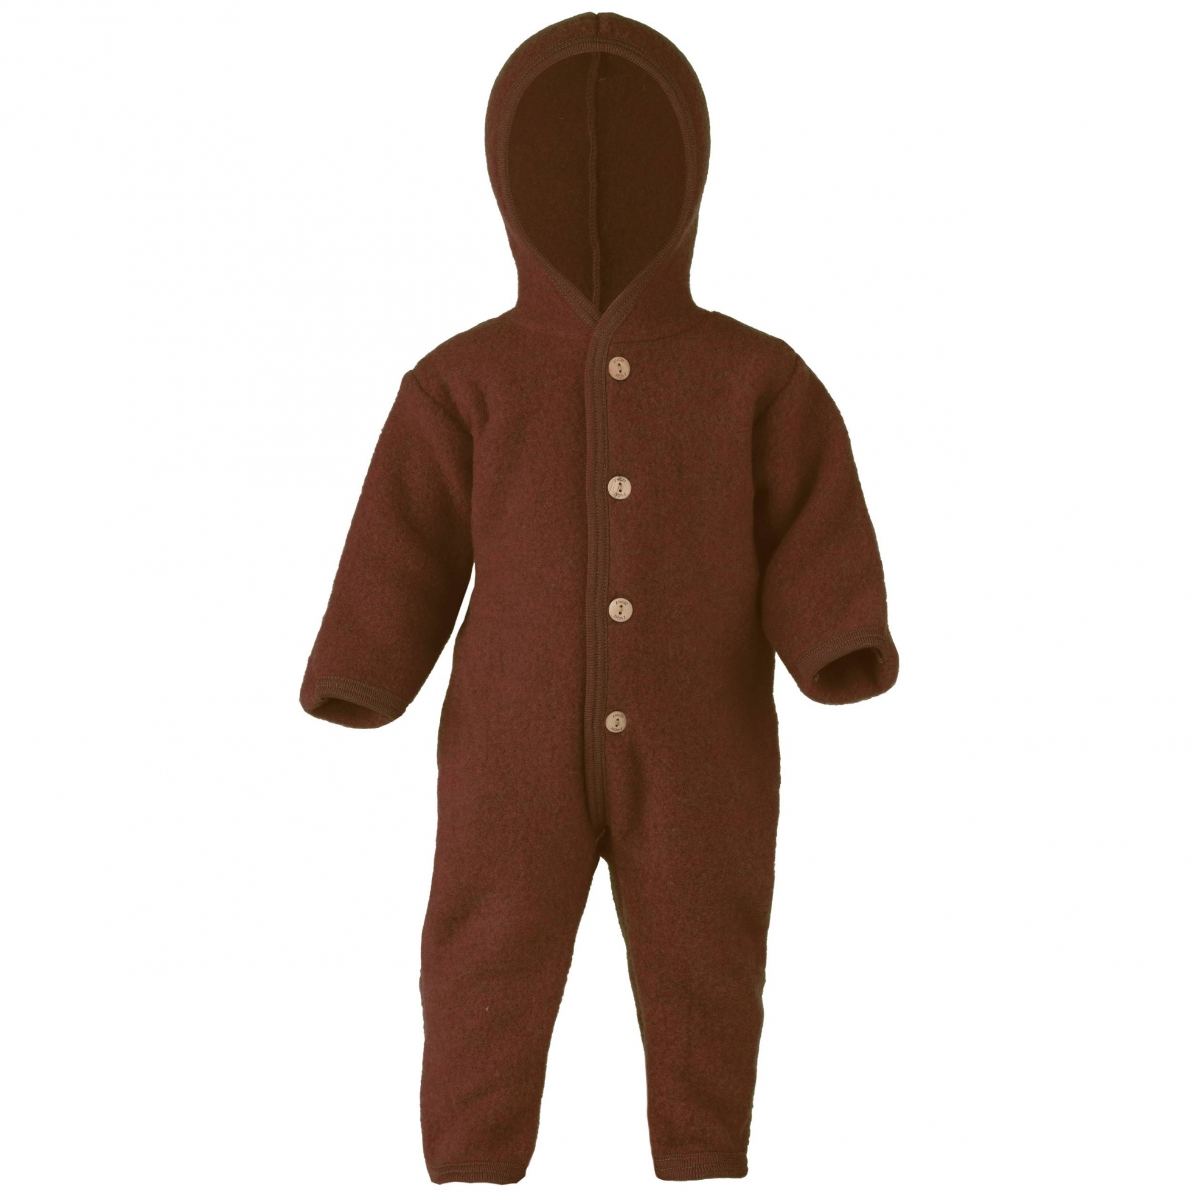 ENGEL Natur Hooded overall with buttons cinnamon melange 575722-079E 